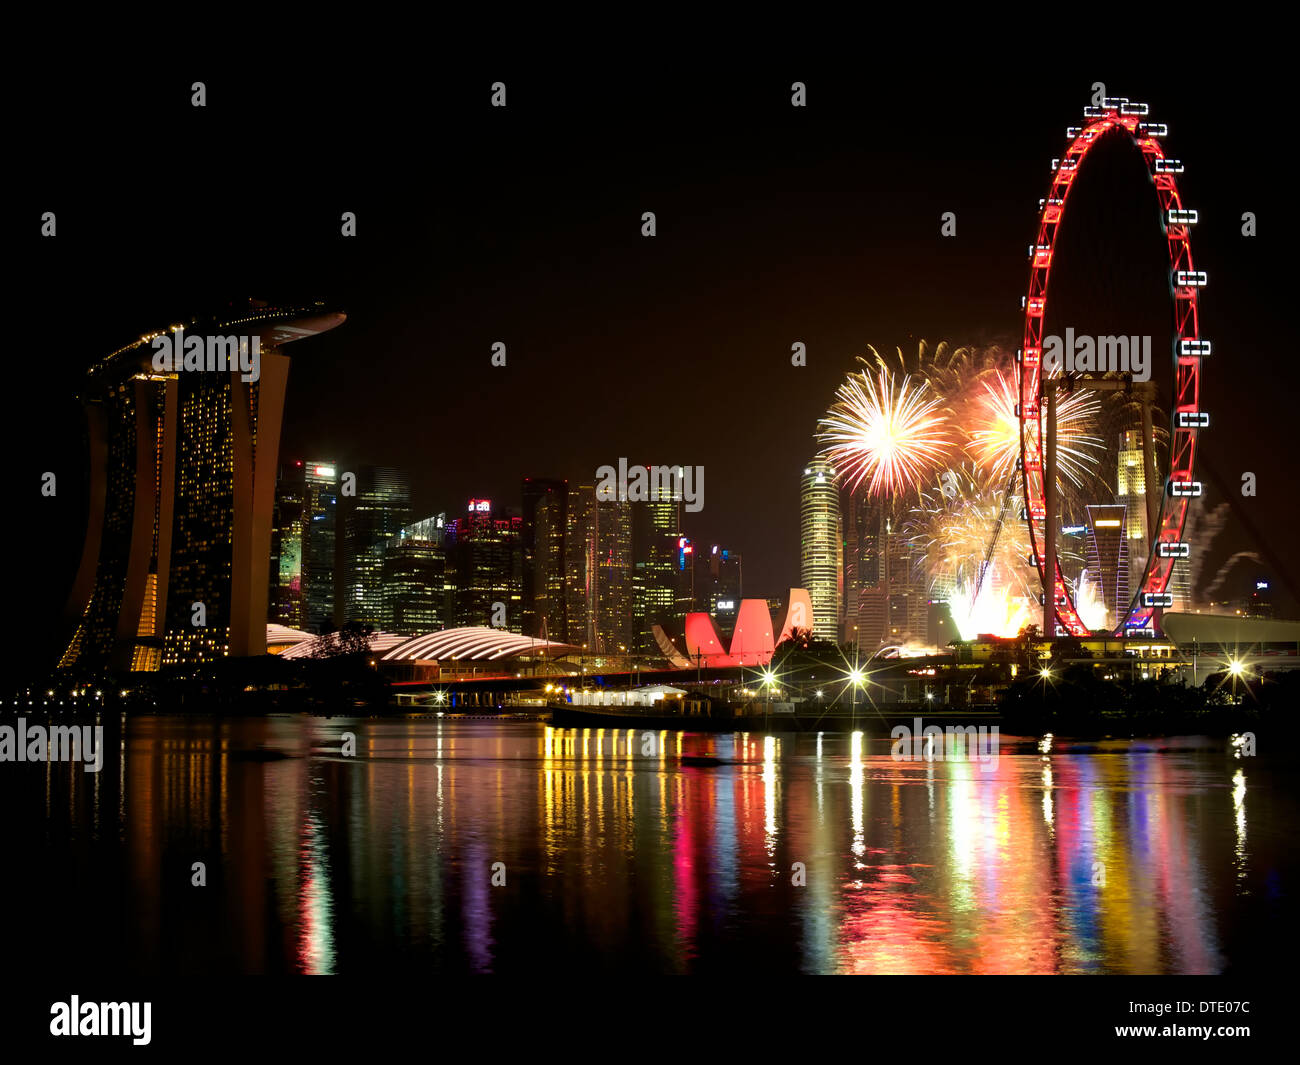 View of Marina Bay area from Bay East Garden during Singapore's National Day Celebration with fireworks display Stock Photo